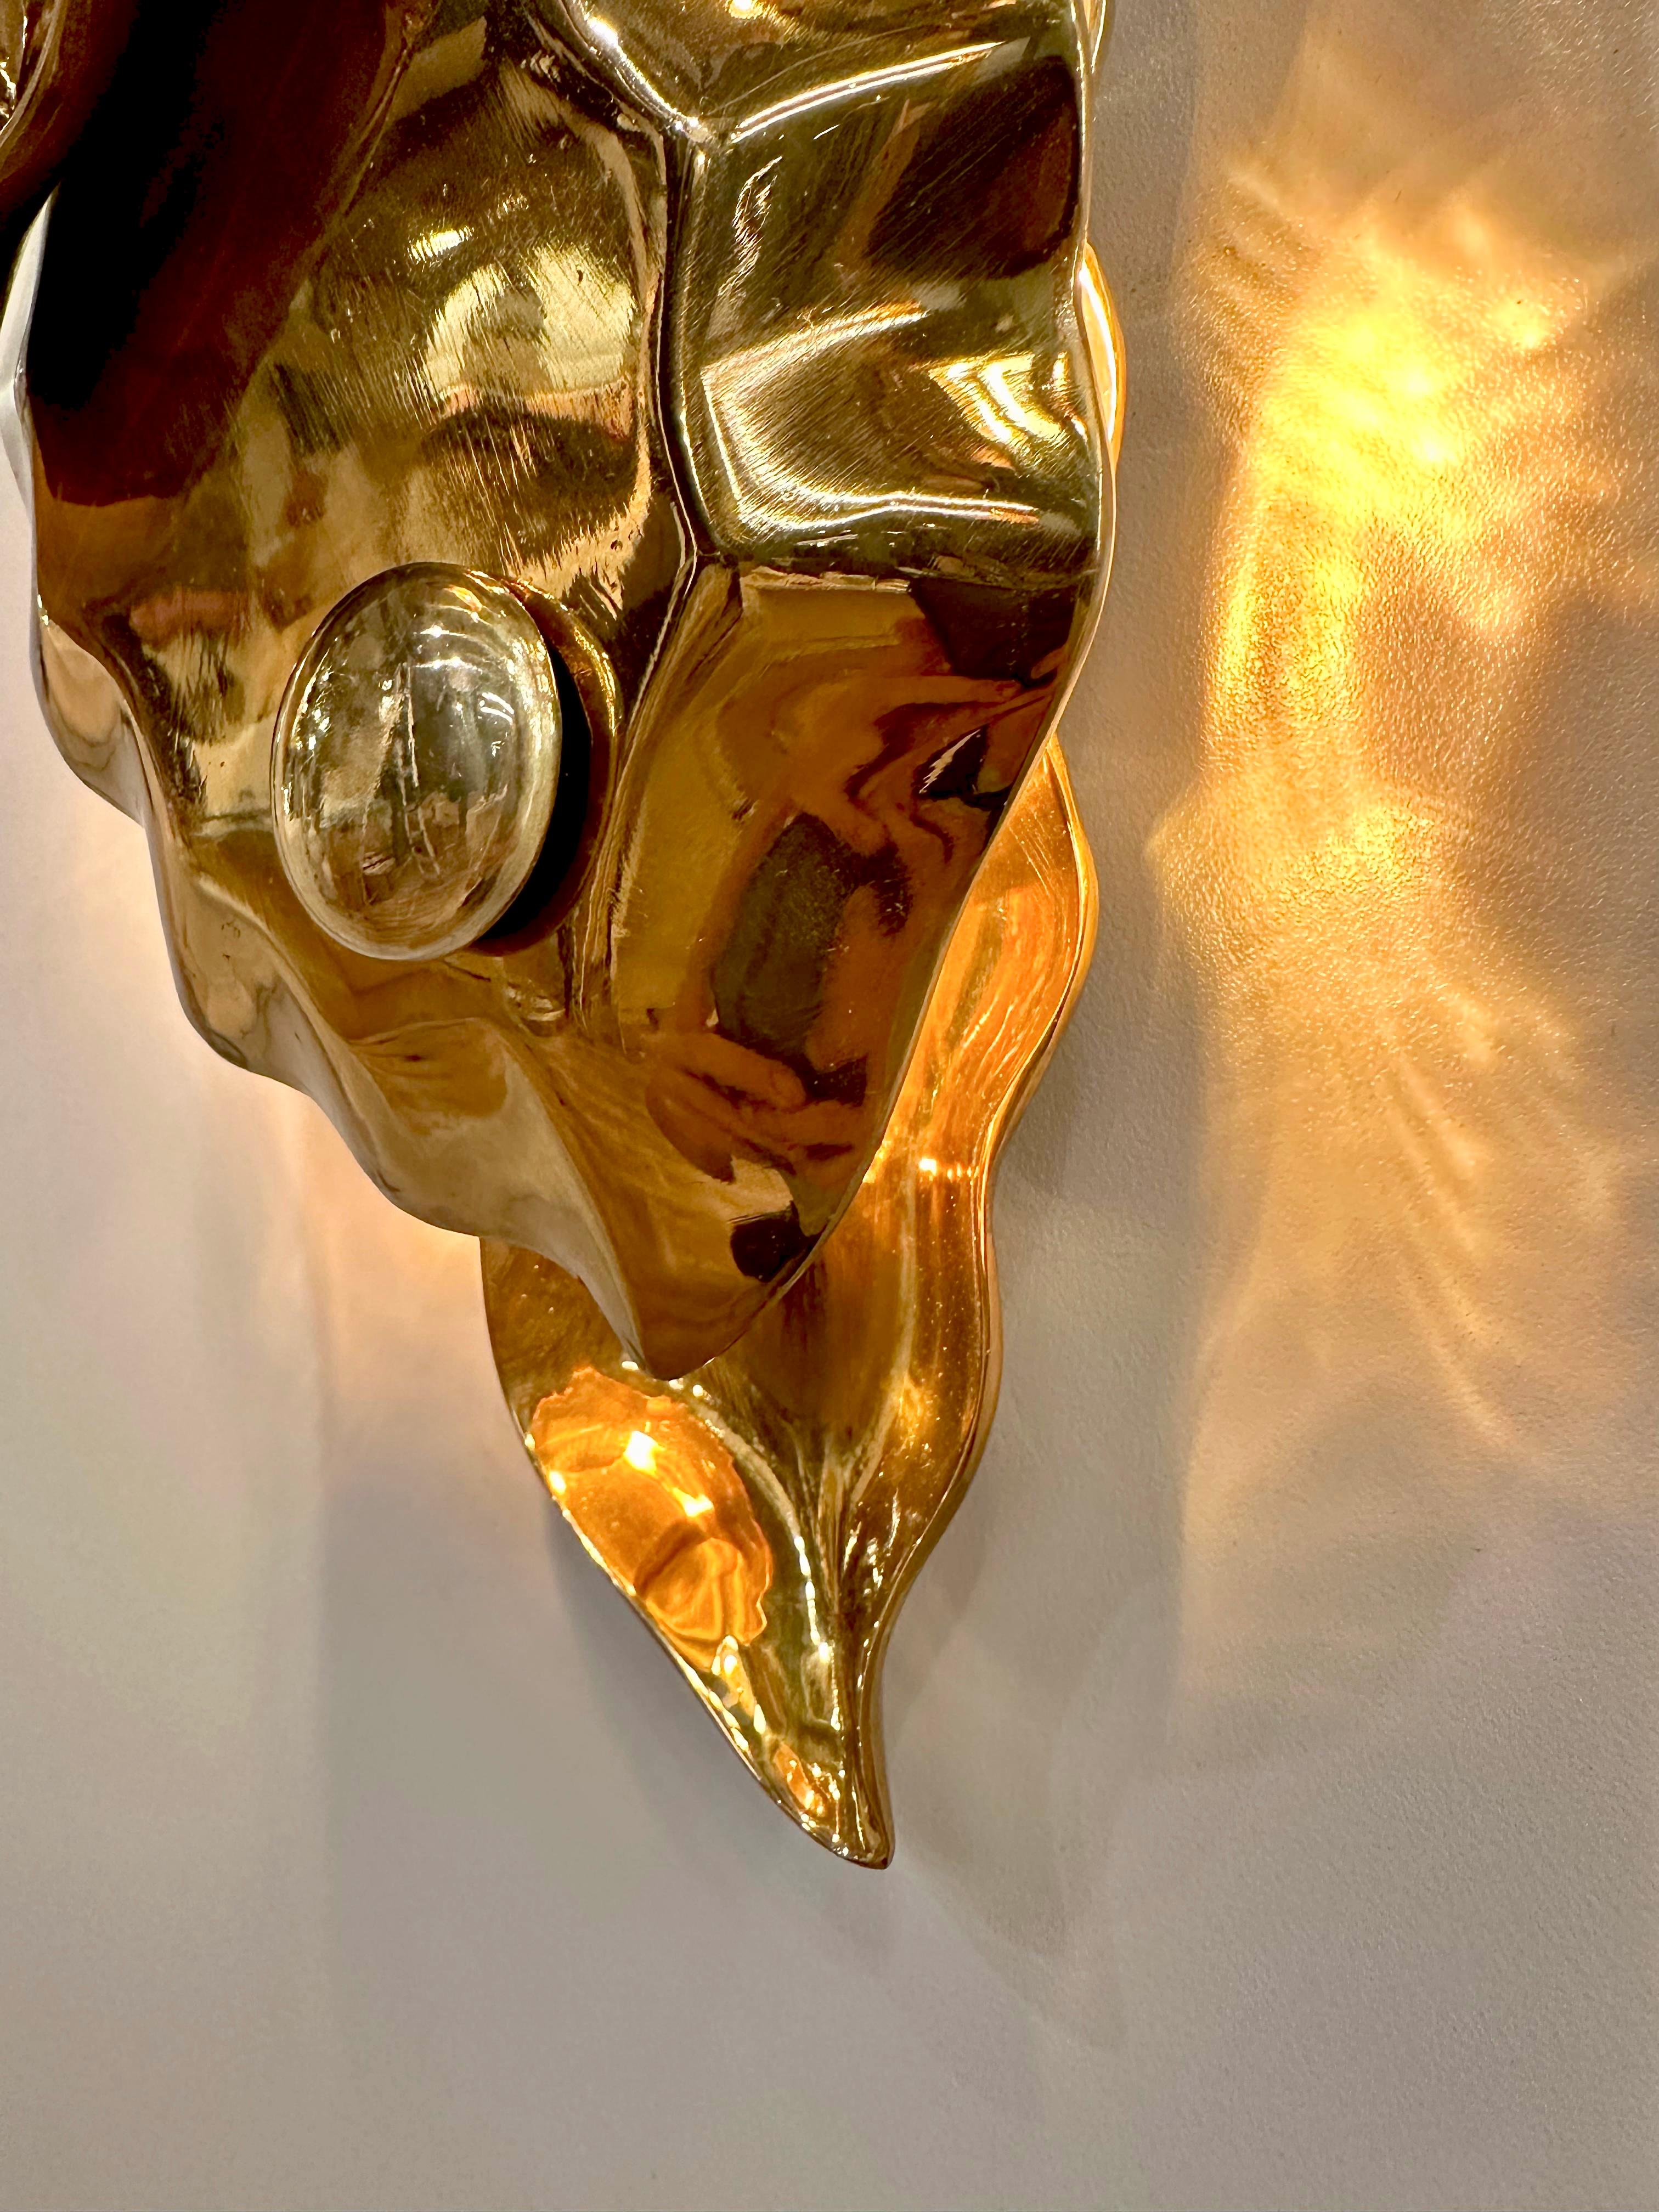 Capua Brass Casting Wall Sconce, Art Lighting, Sculptural Lighting In New Condition For Sale In İstiklal, TR